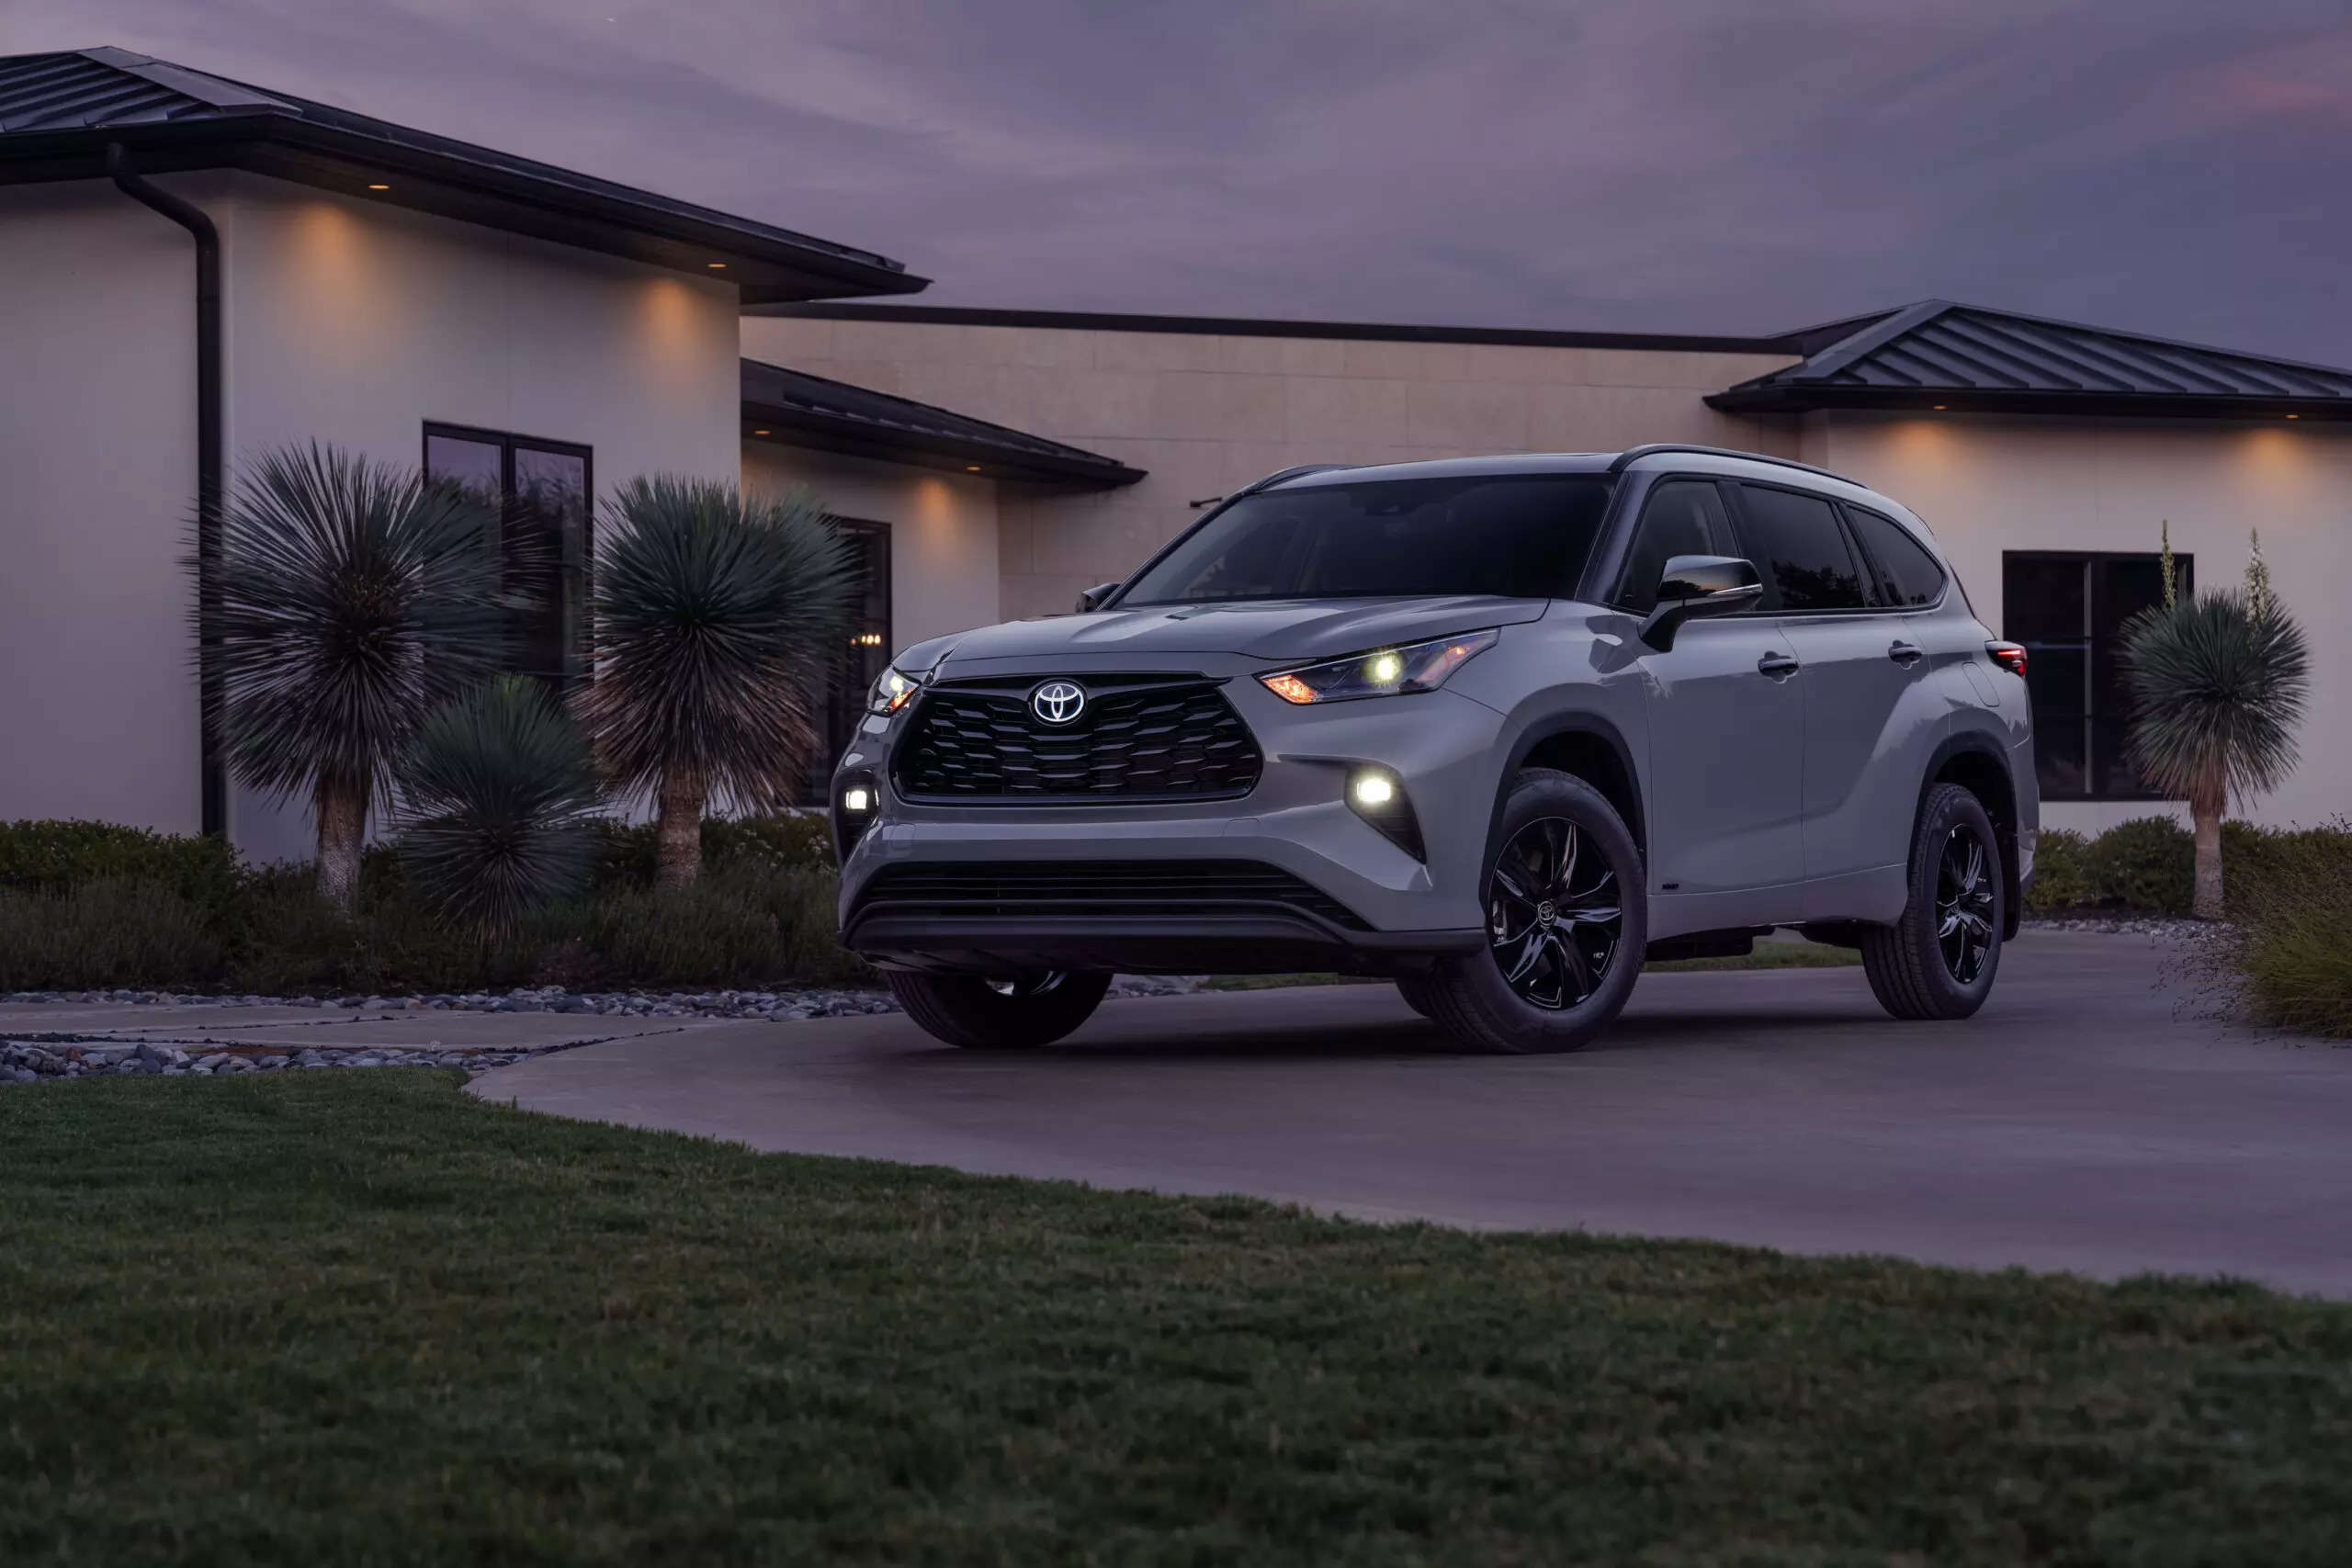 Toyota Highlander Hybrid SUV: Toyota unveils new features and